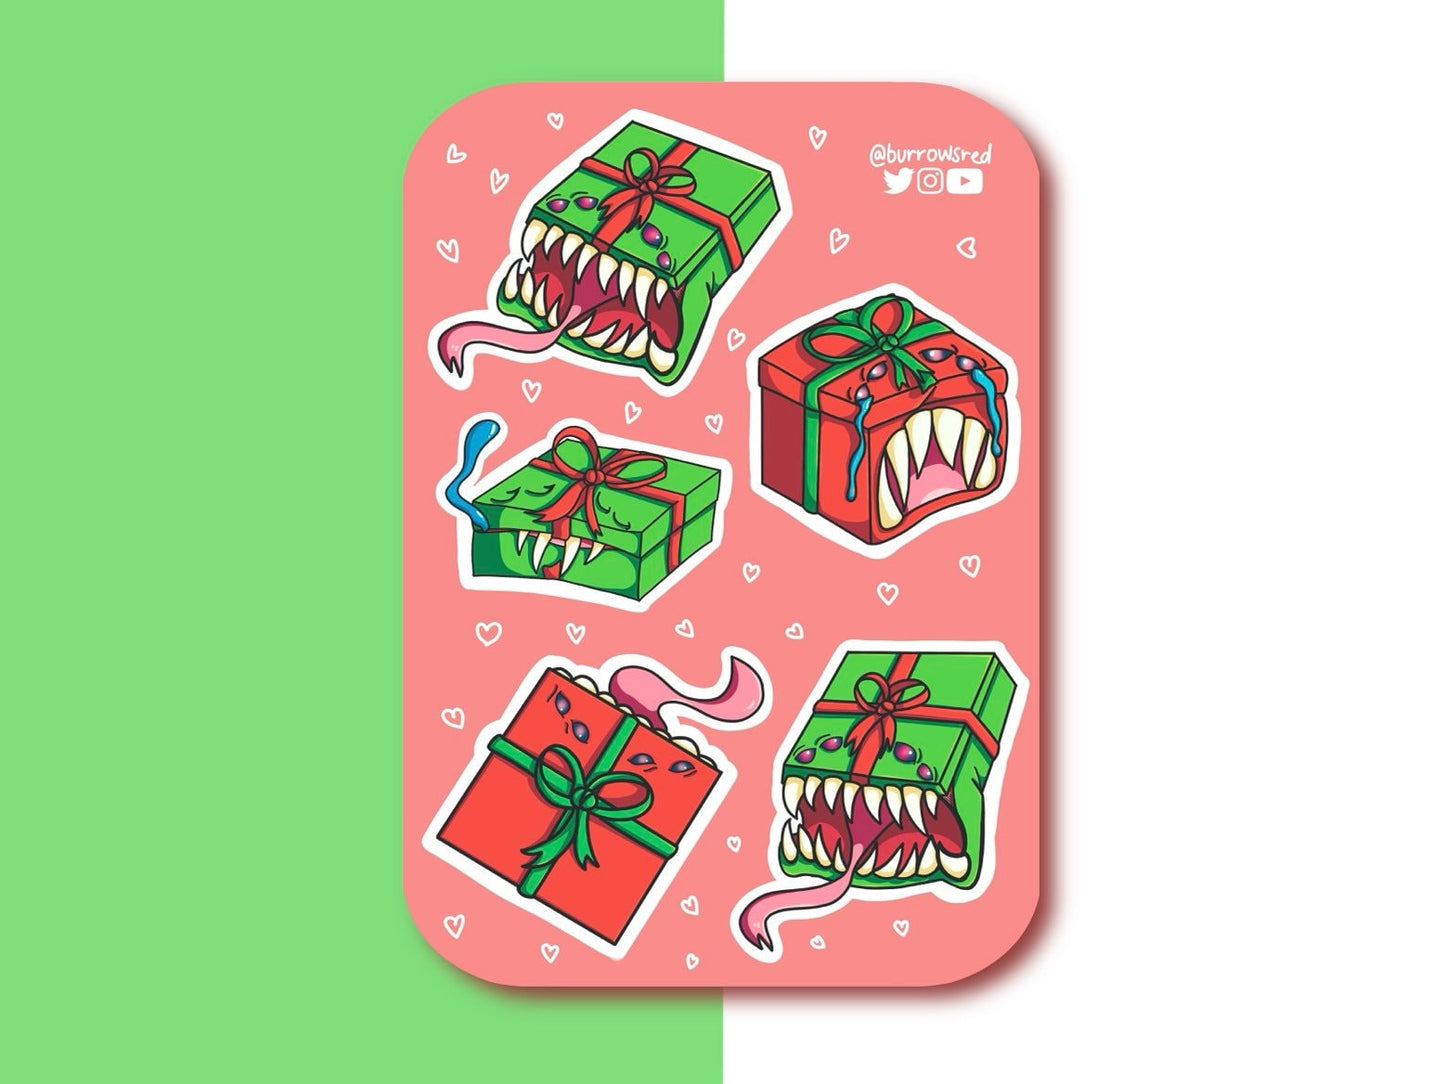 Gift of a Mimic for Christmas - Sticker Sheet